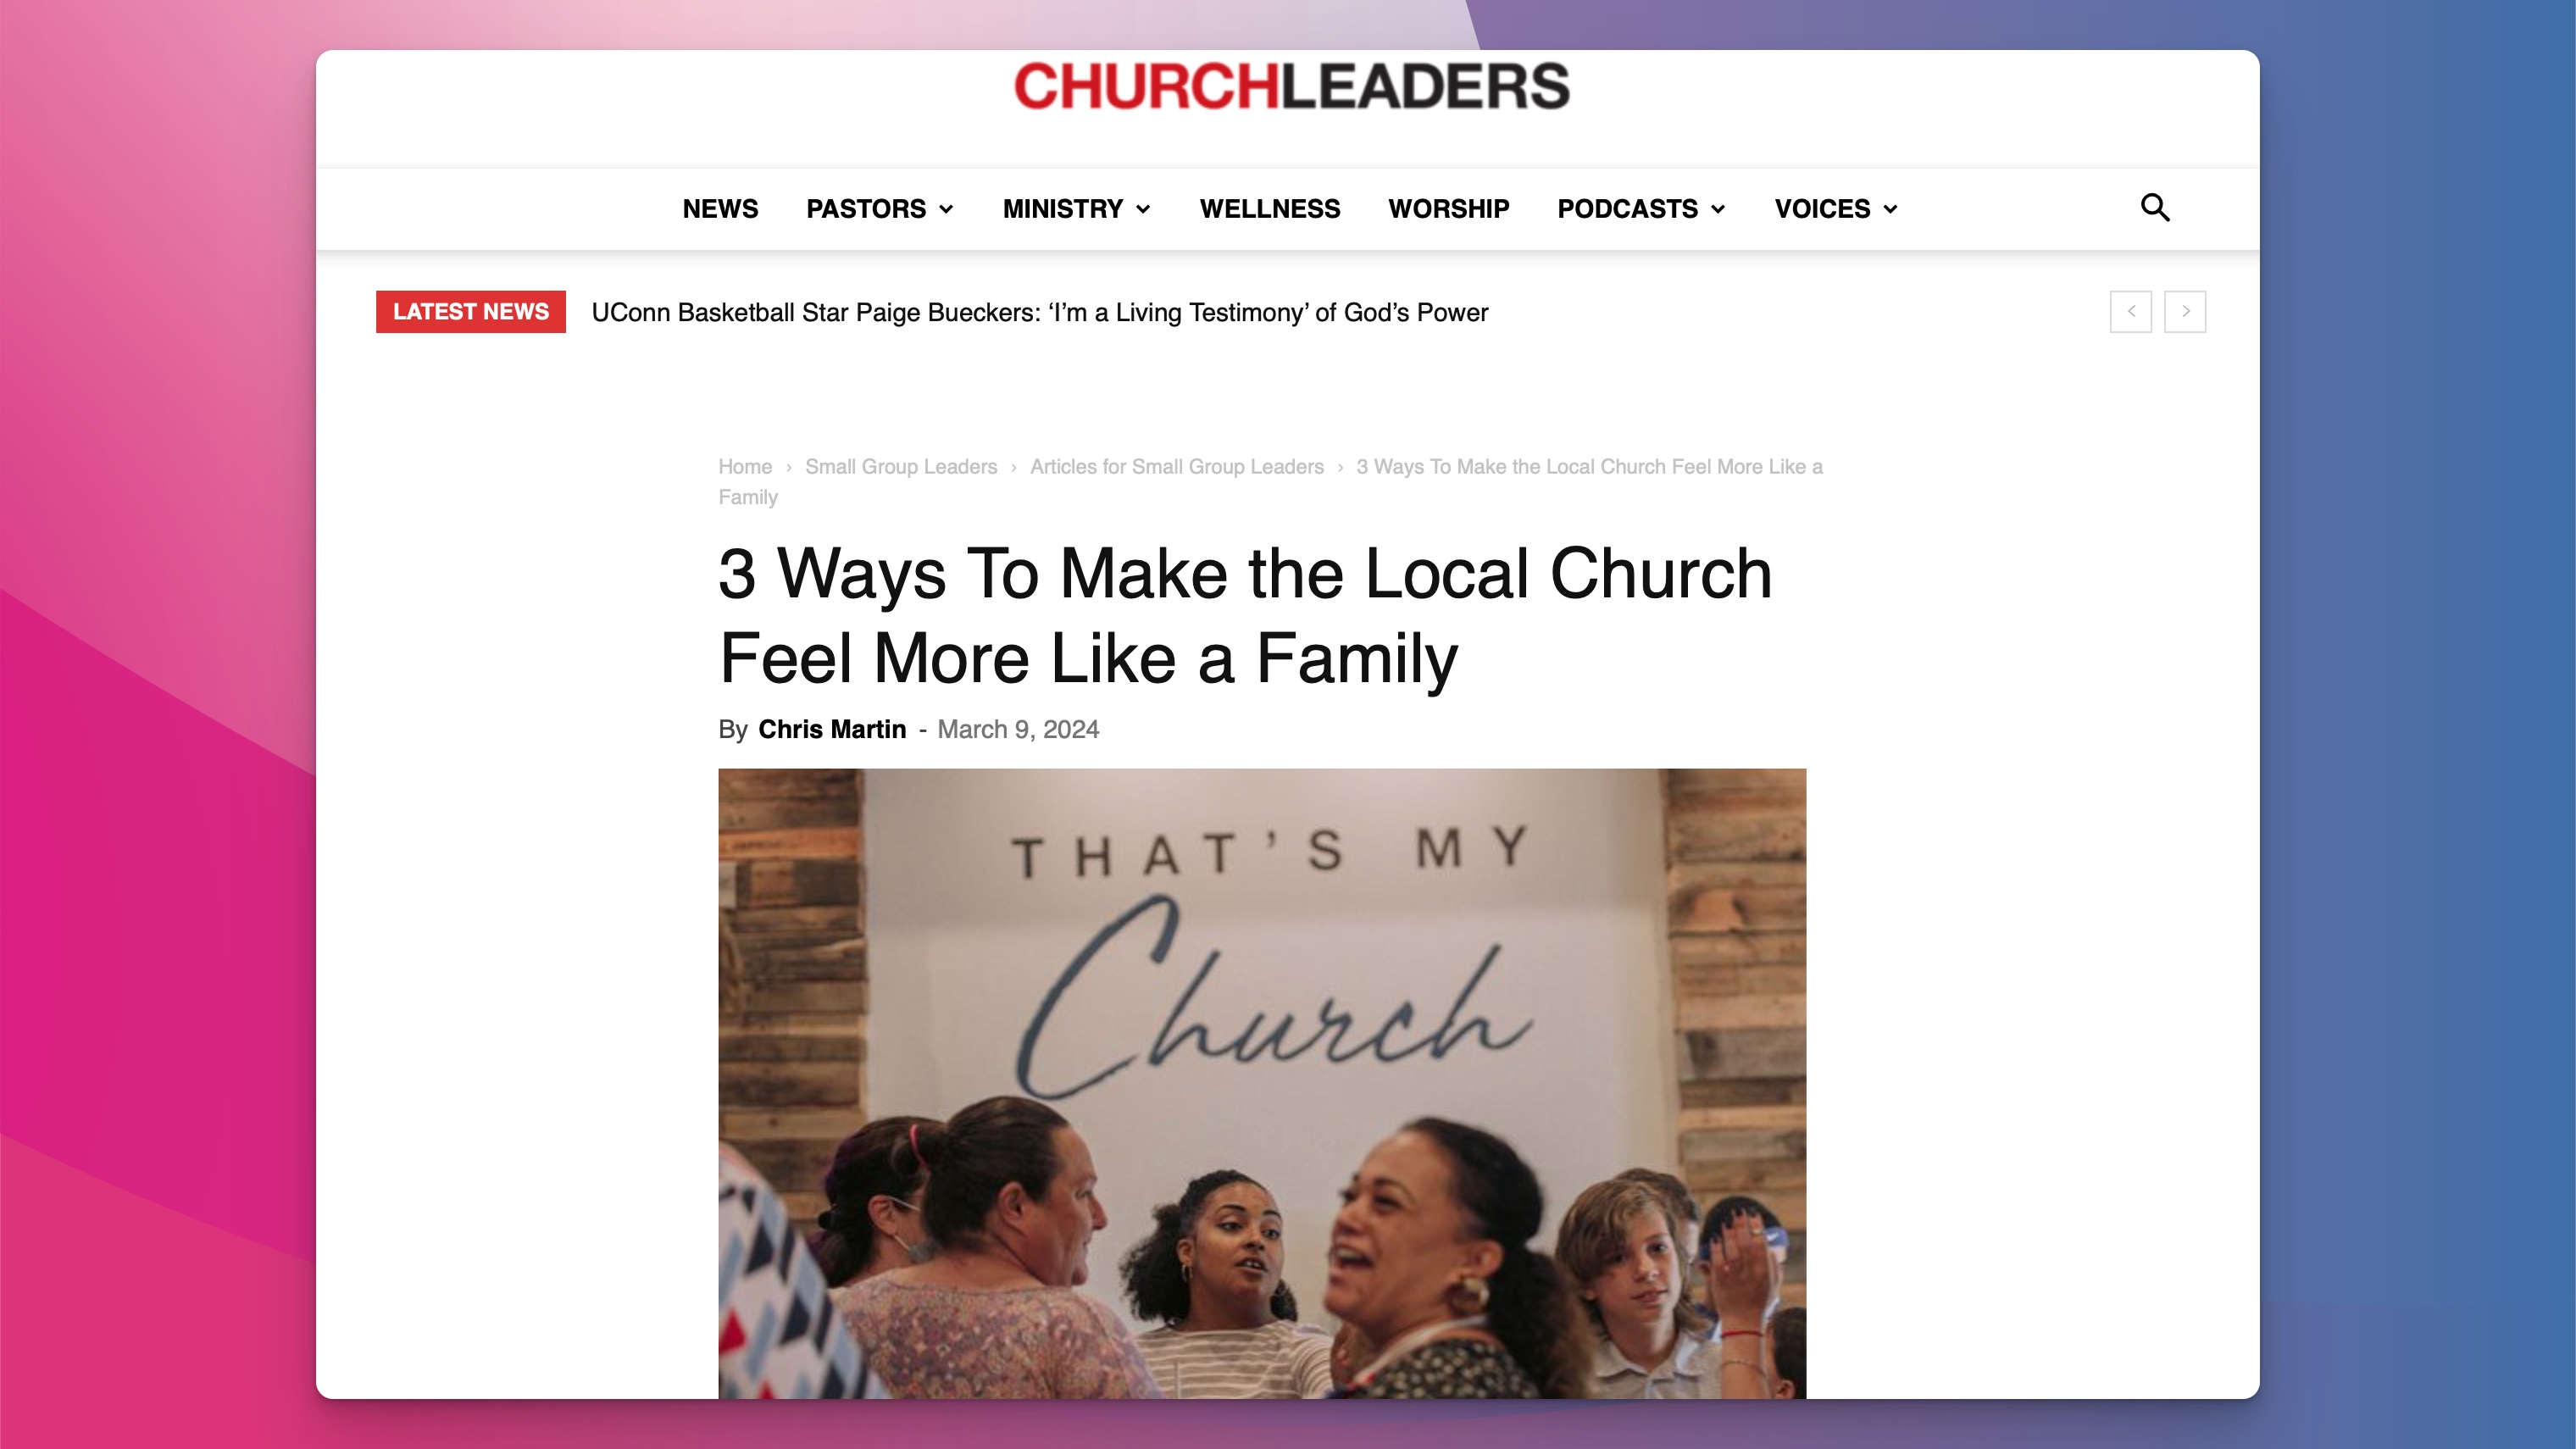 3 Ways To Make the Local Church Feel More Like a Family - Churchleaders